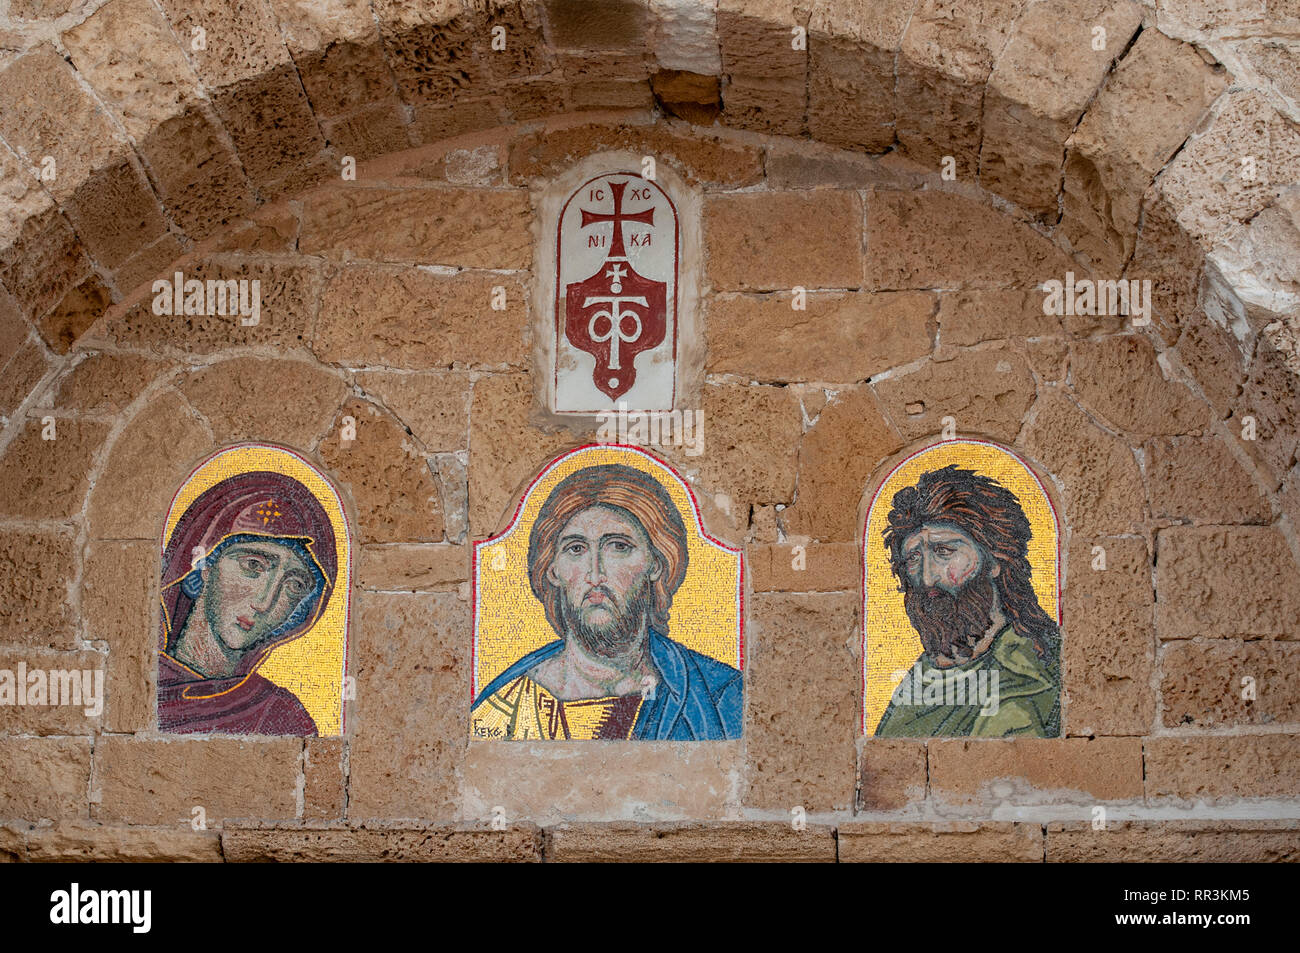 Ancient port of Jaffa, Israel pictures of Saints in the Greek Orthodox monastery wall Stock Photo